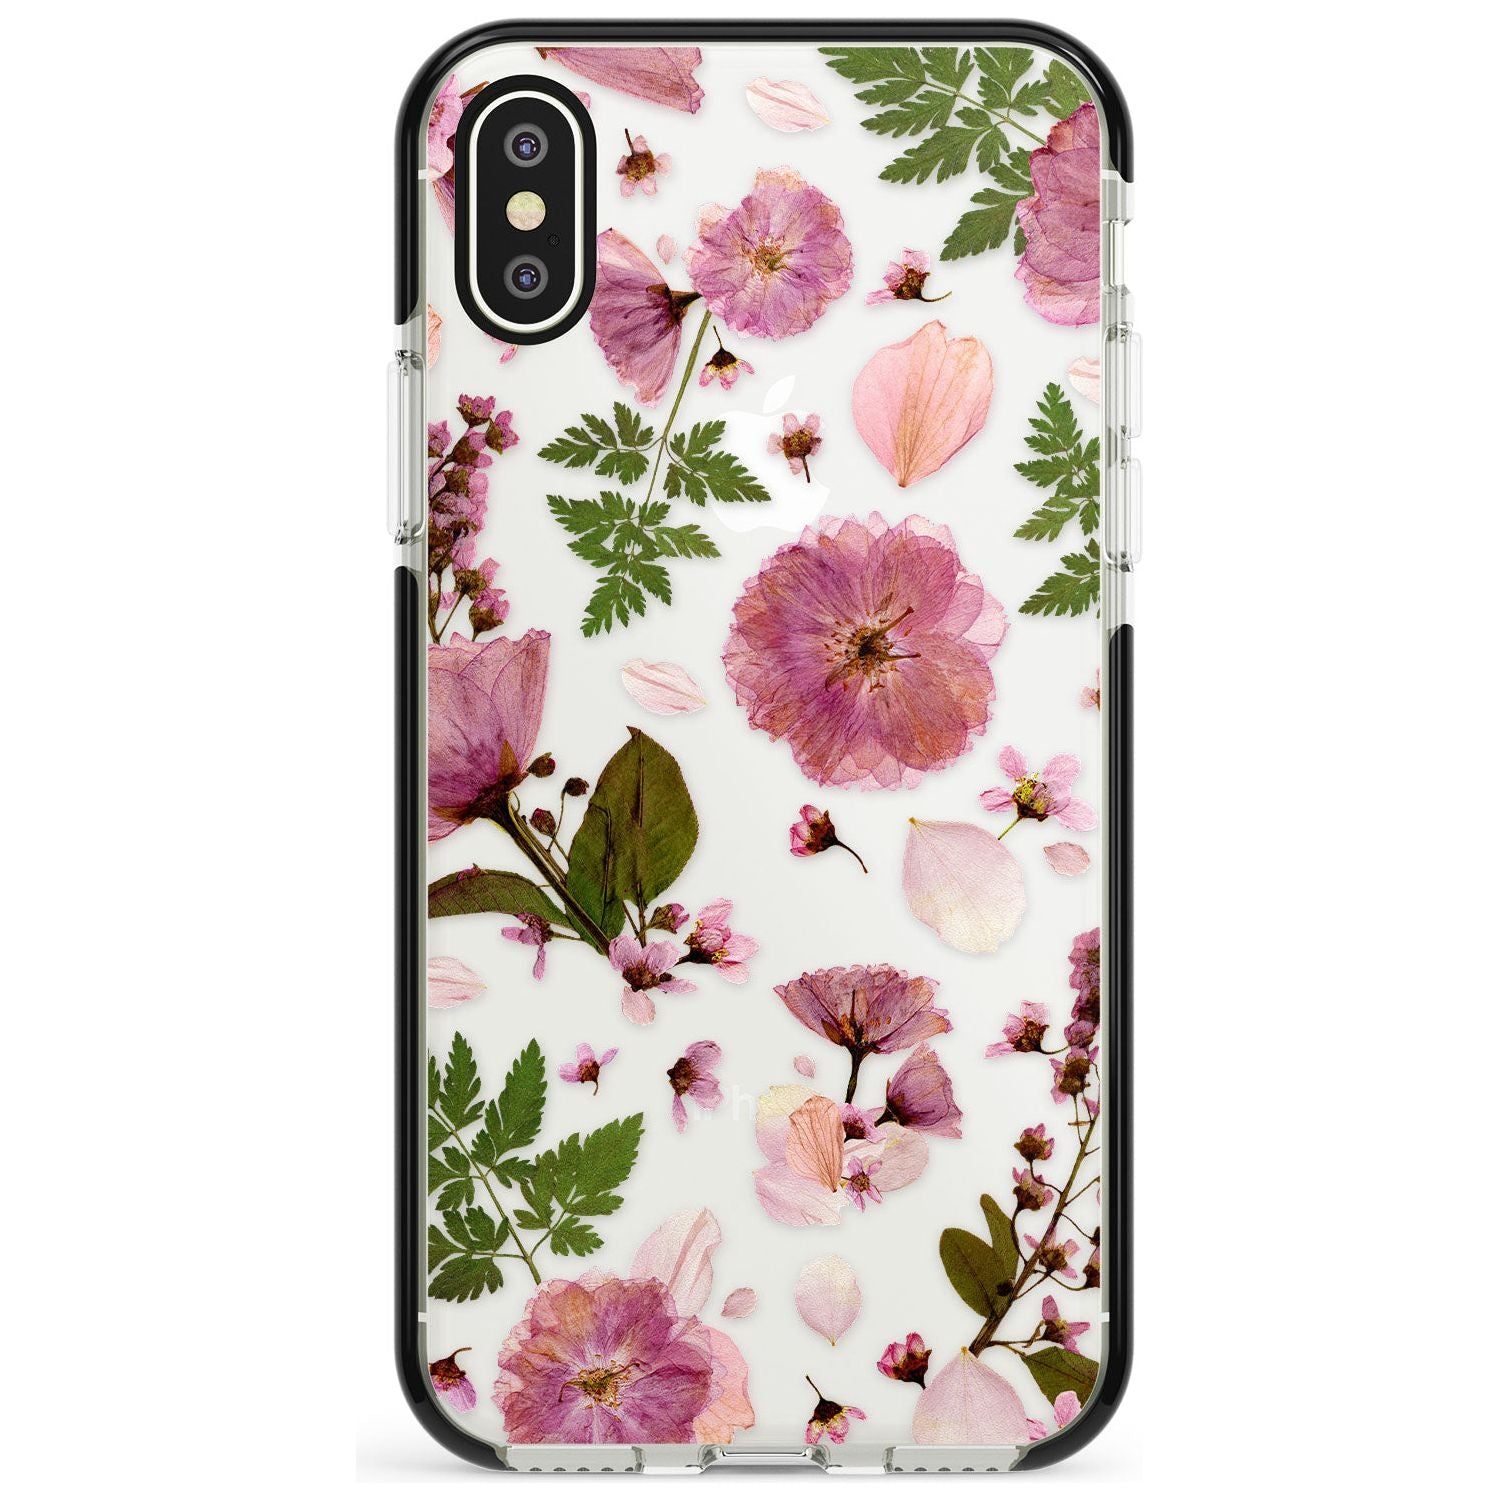 Natural Arrangement of Flowers & Leaves Design Black Impact Phone Case for iPhone X XS Max XR